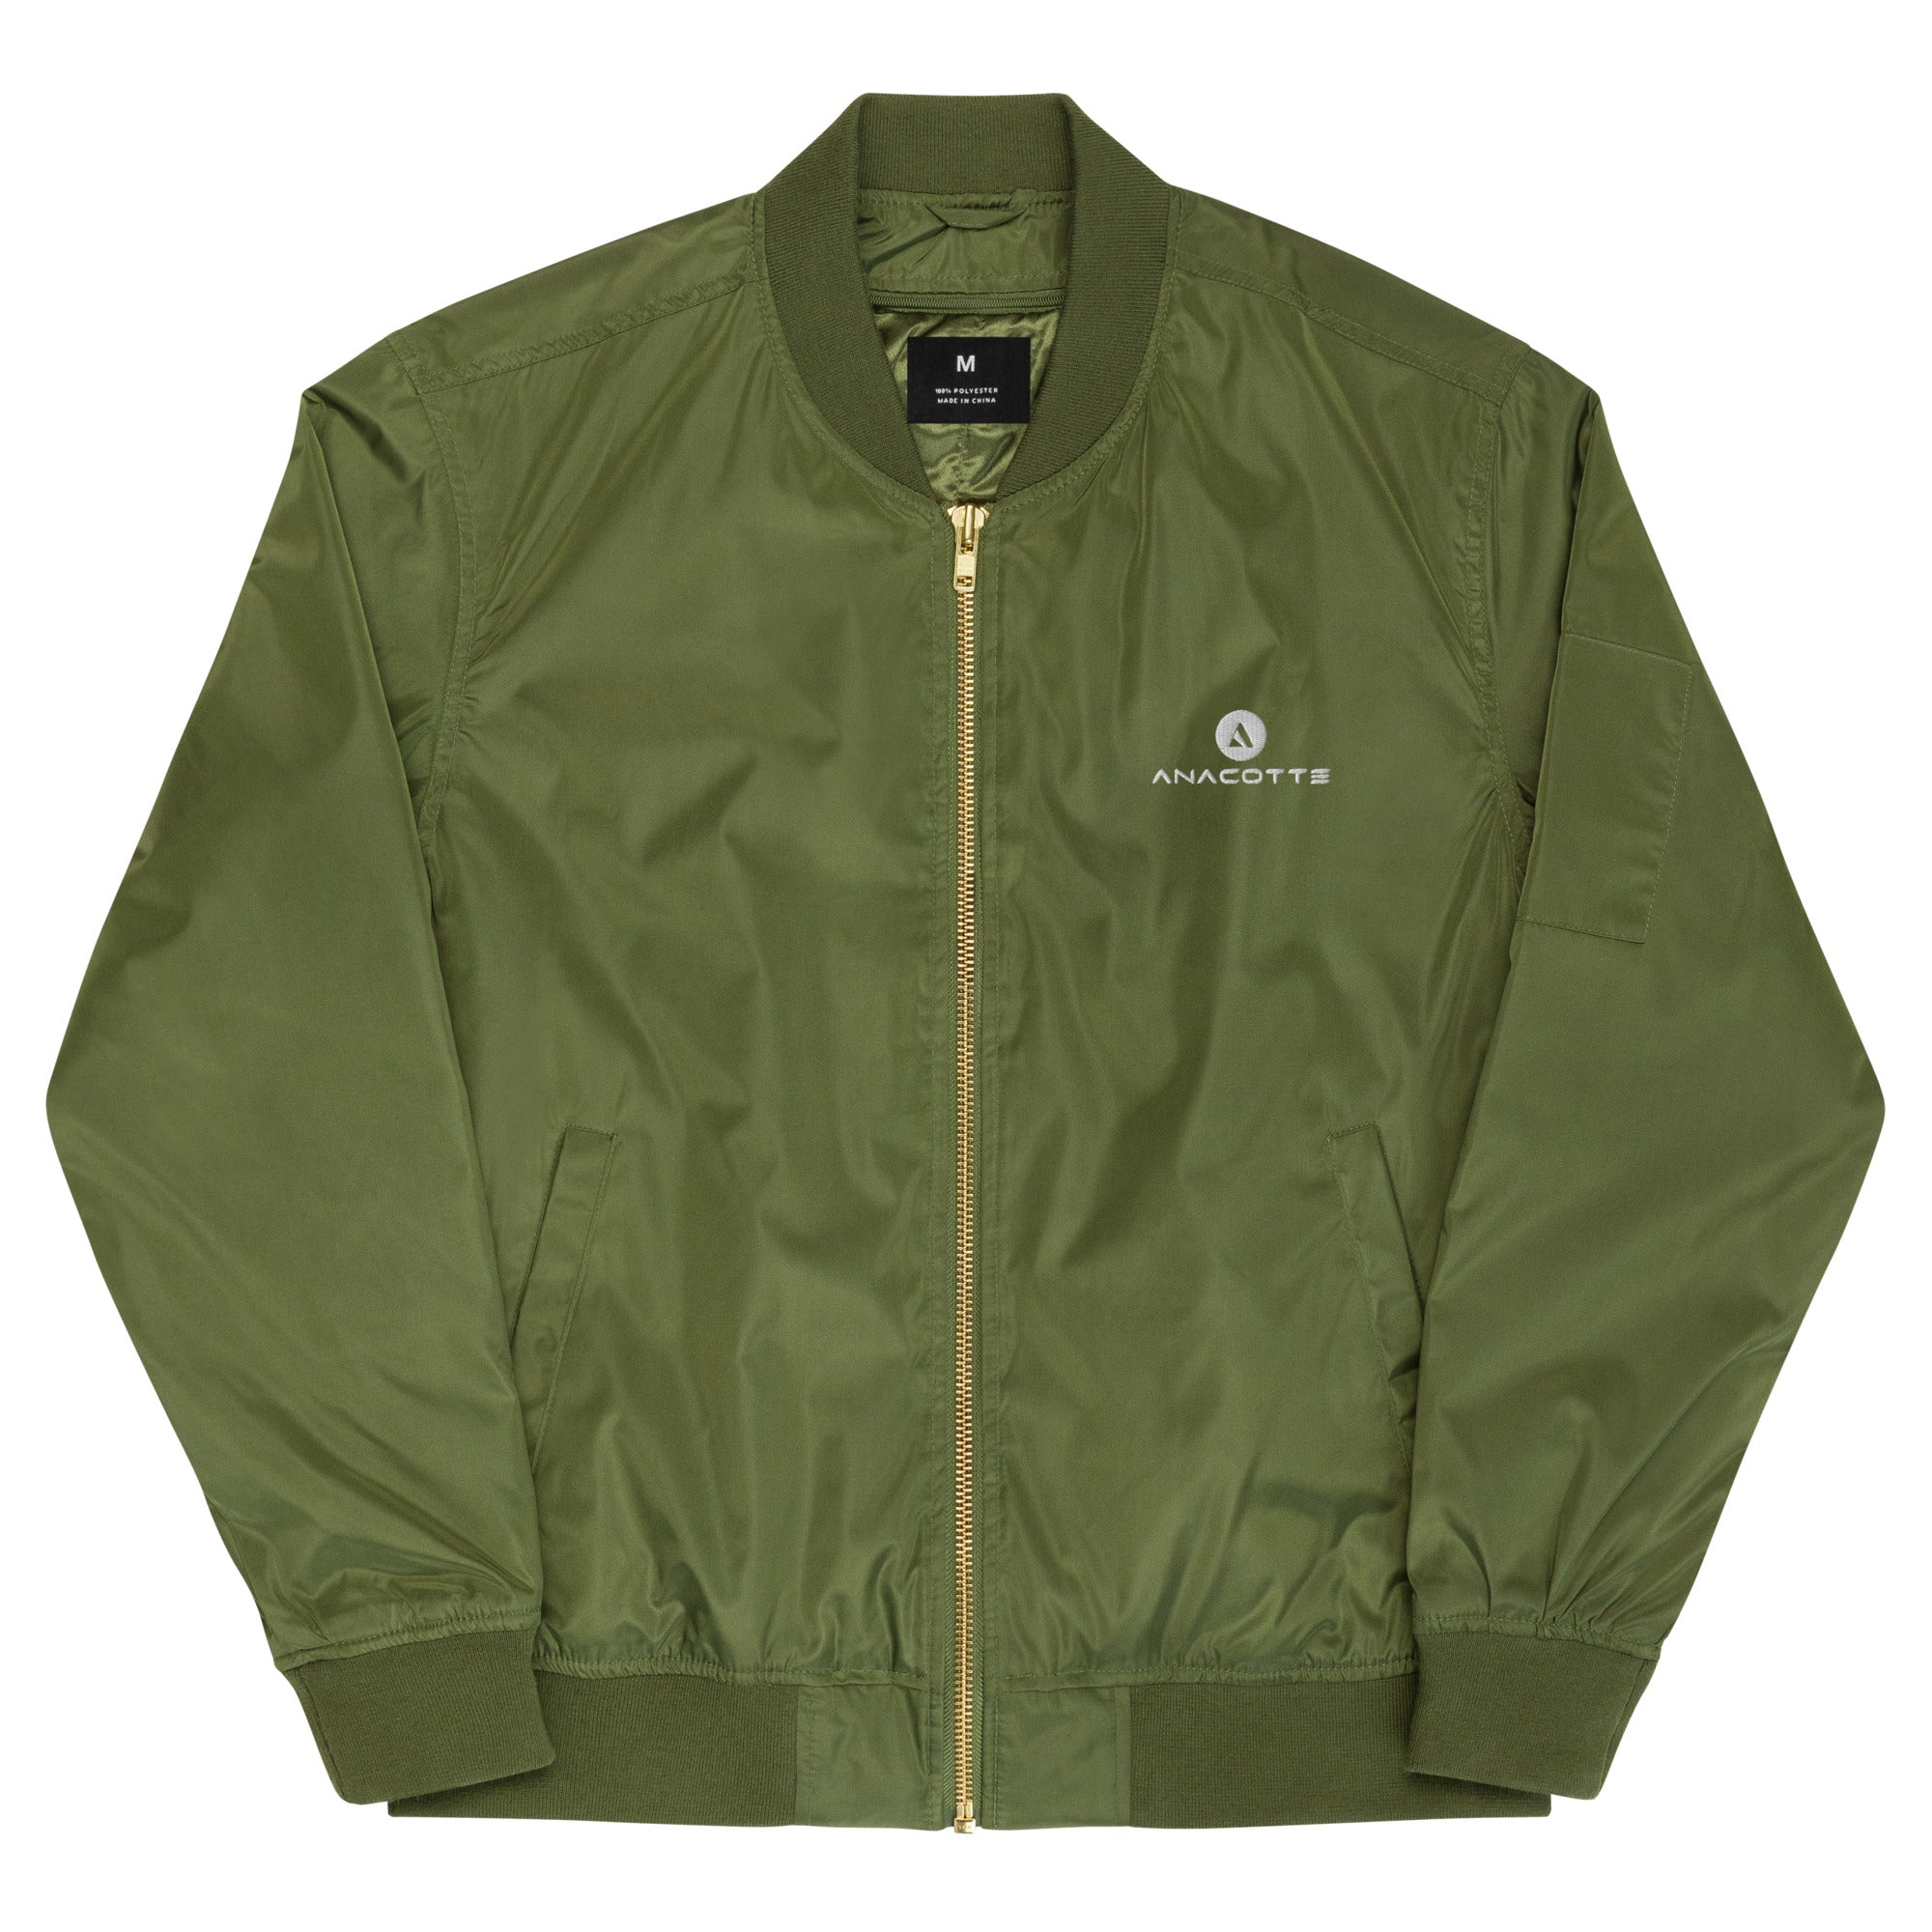 Anacotte Premium recycled bomber jacket Black and Green